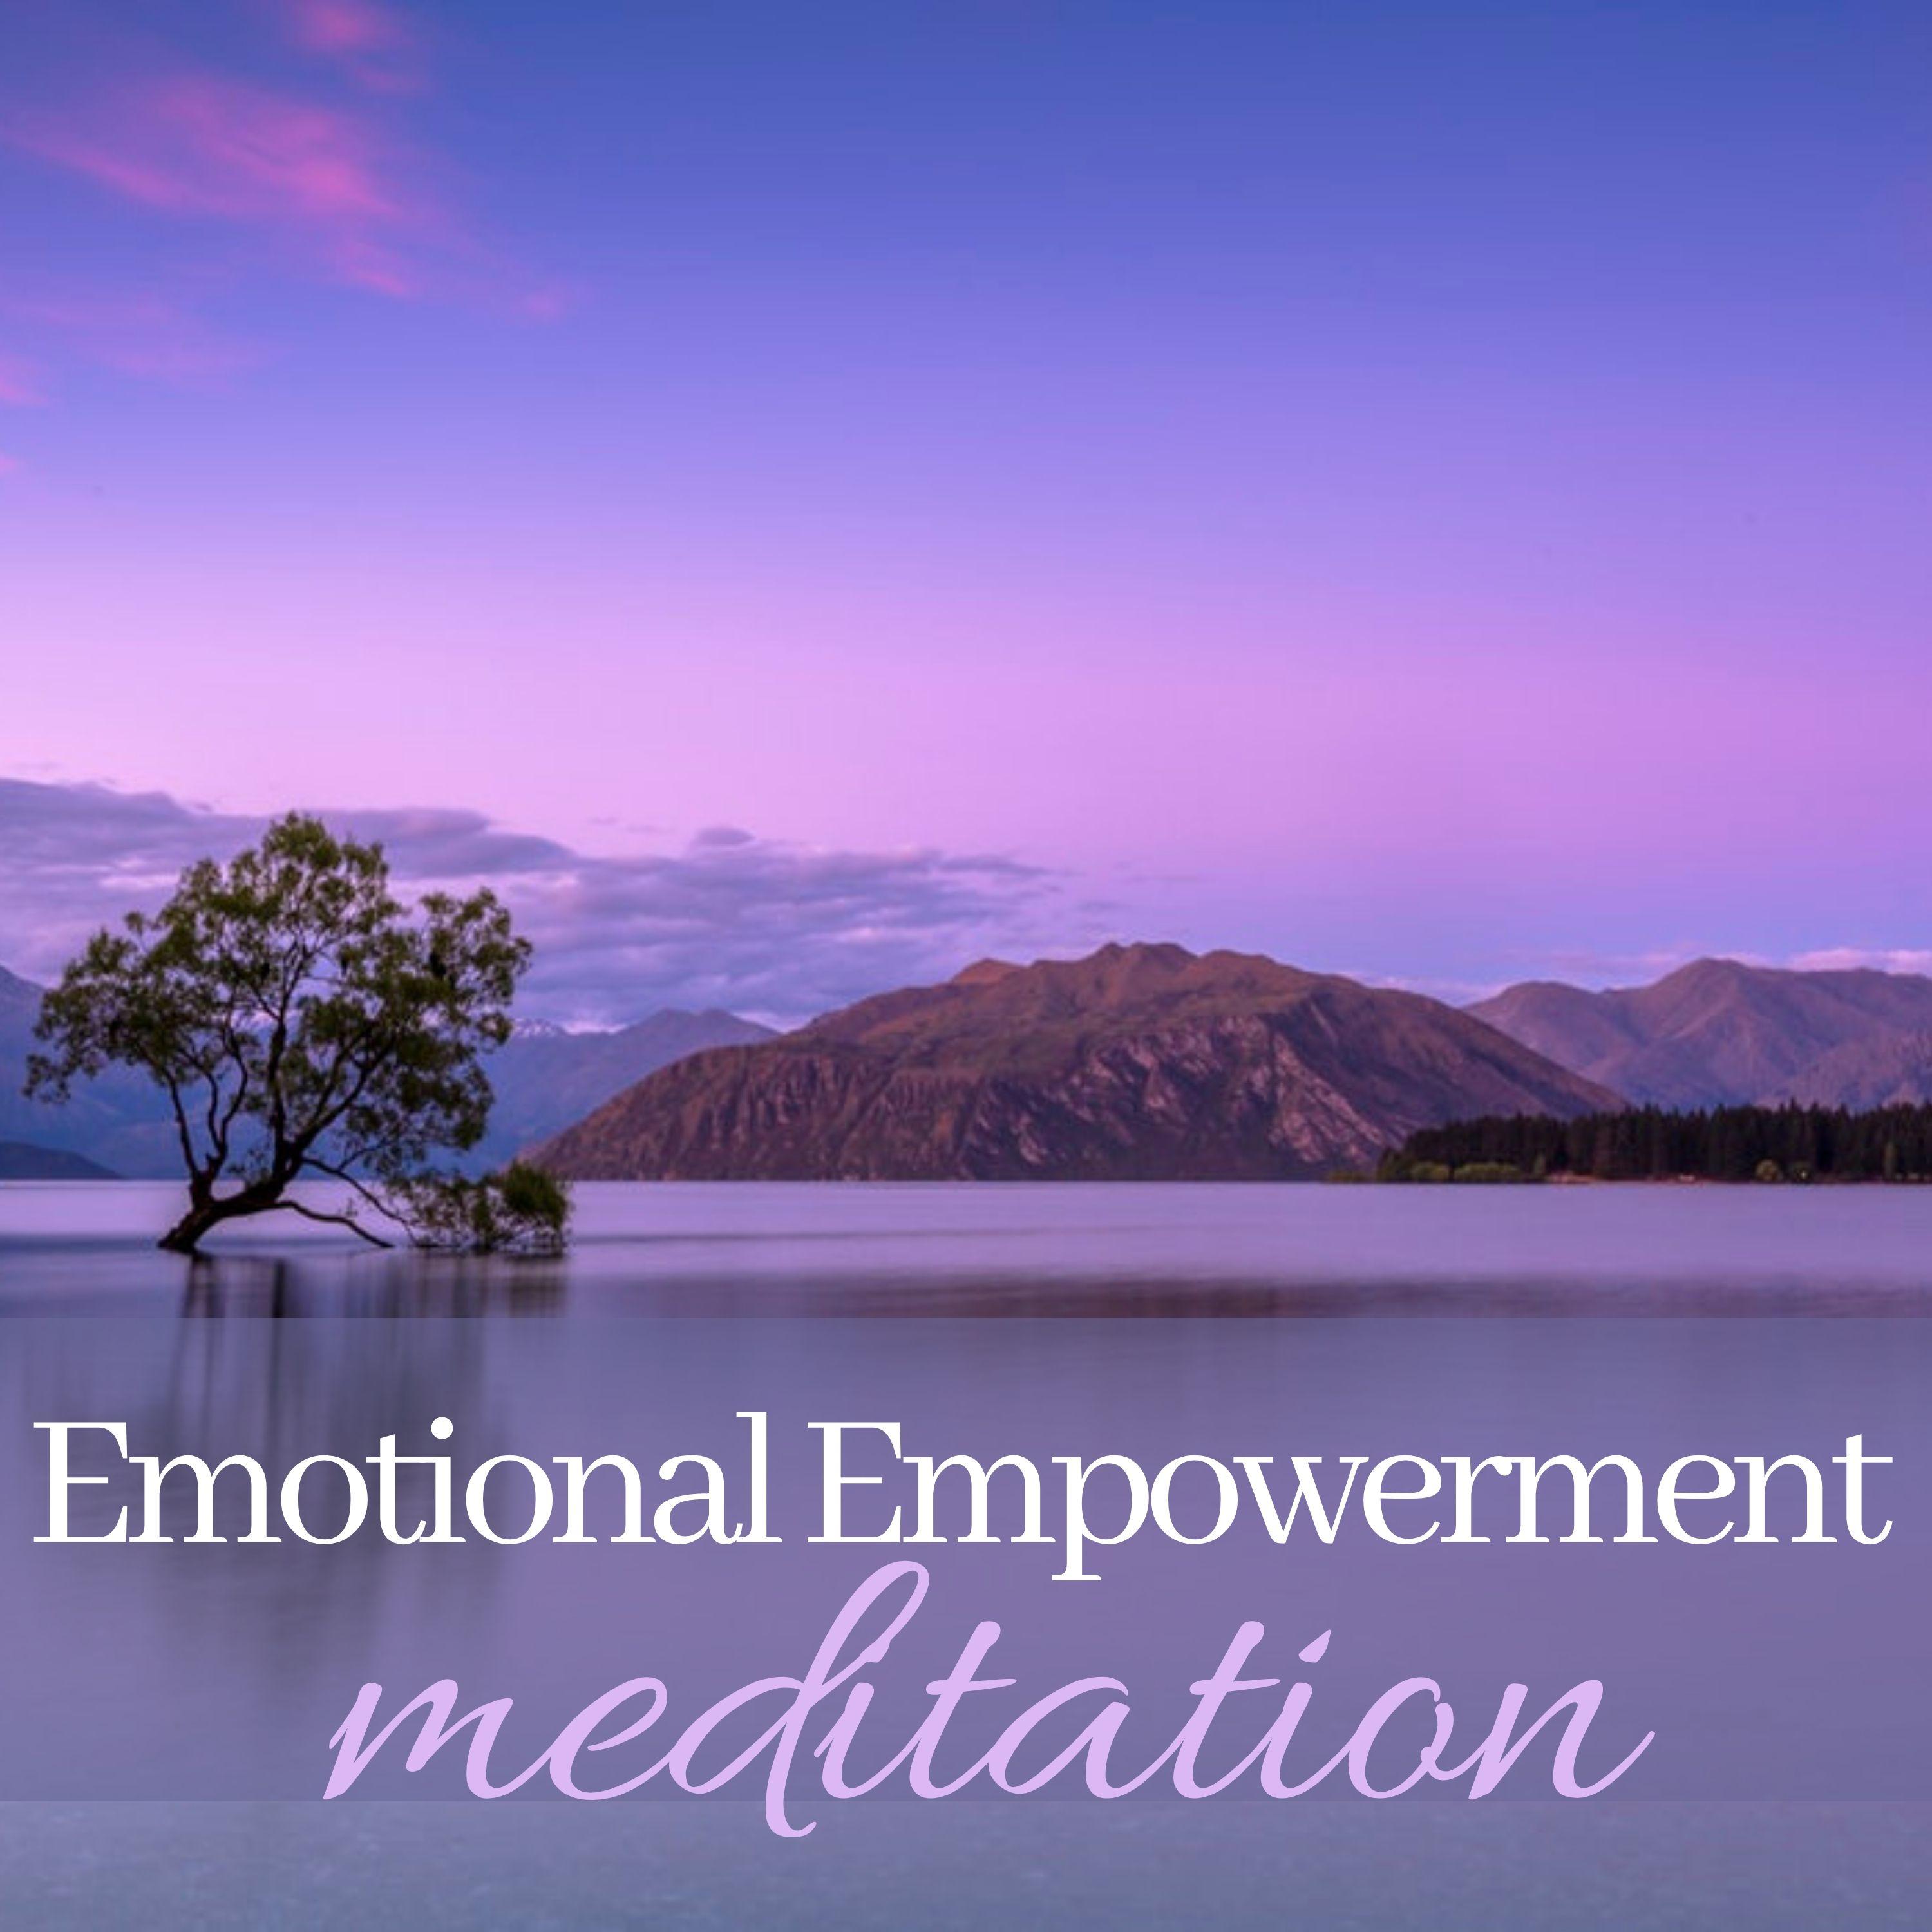 Emotional Empowerment Meditation - Soothing Sounds to Help Control Your Emotions